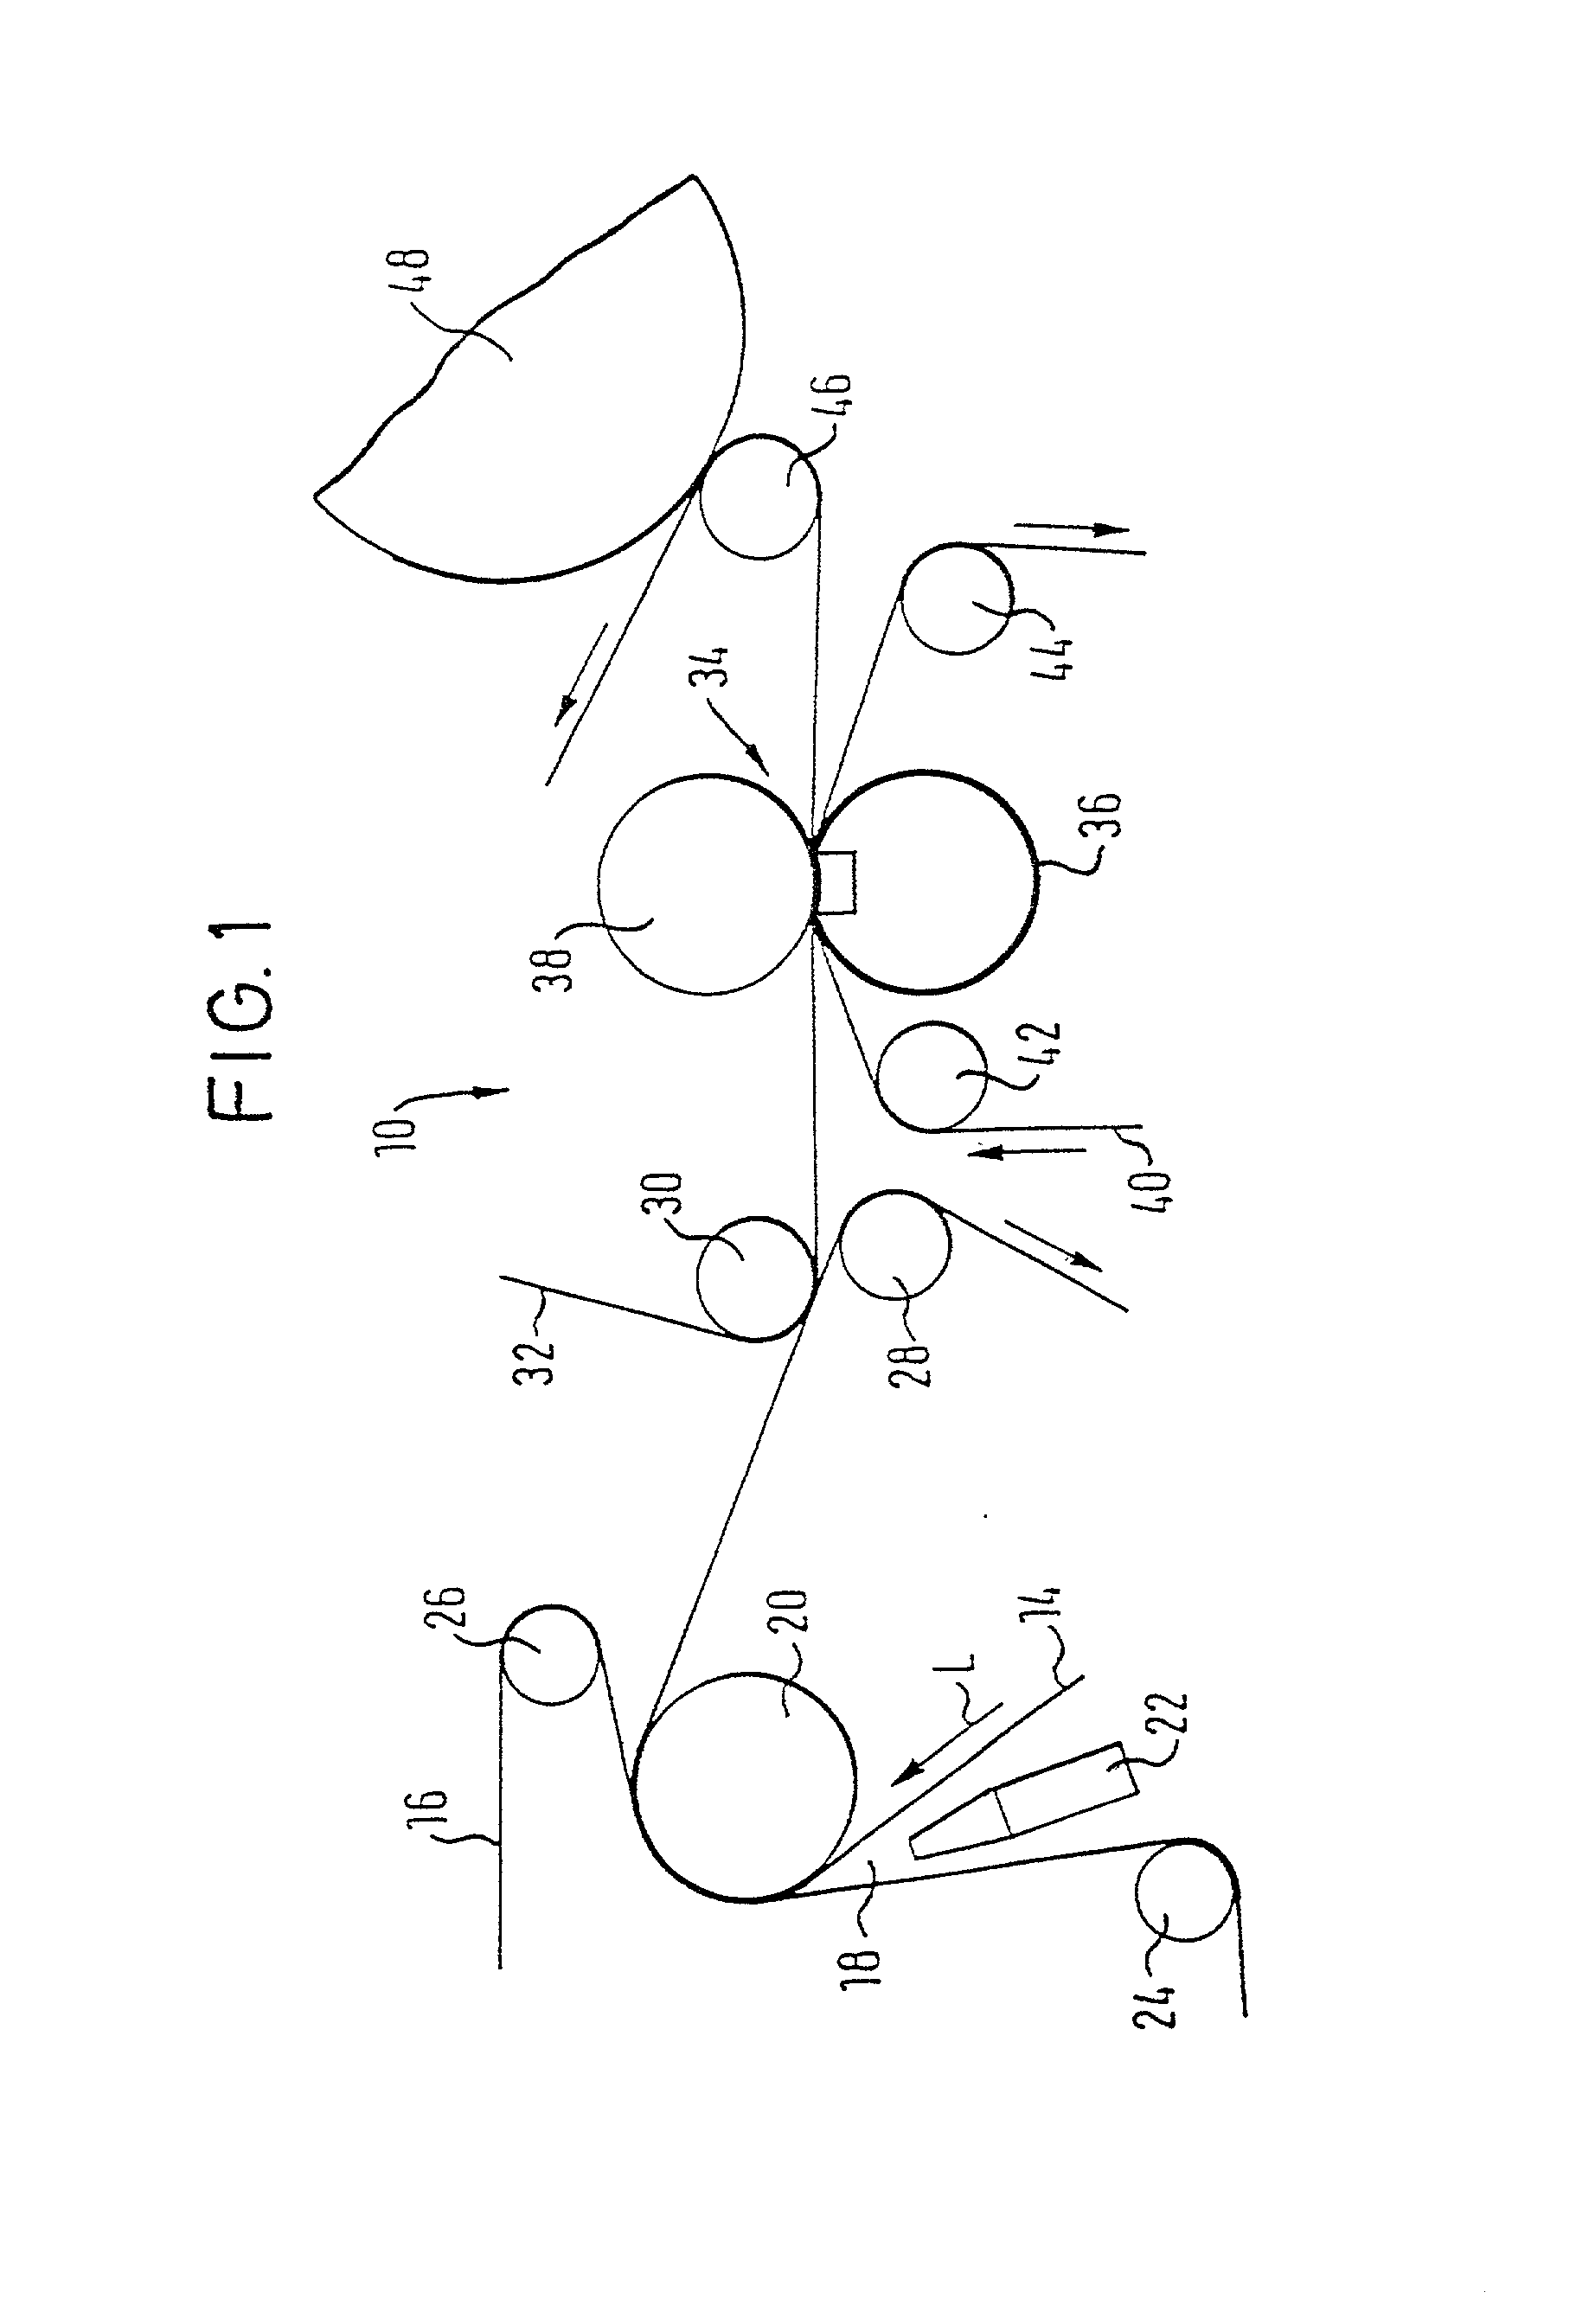 Machine and process for producing a tissue web